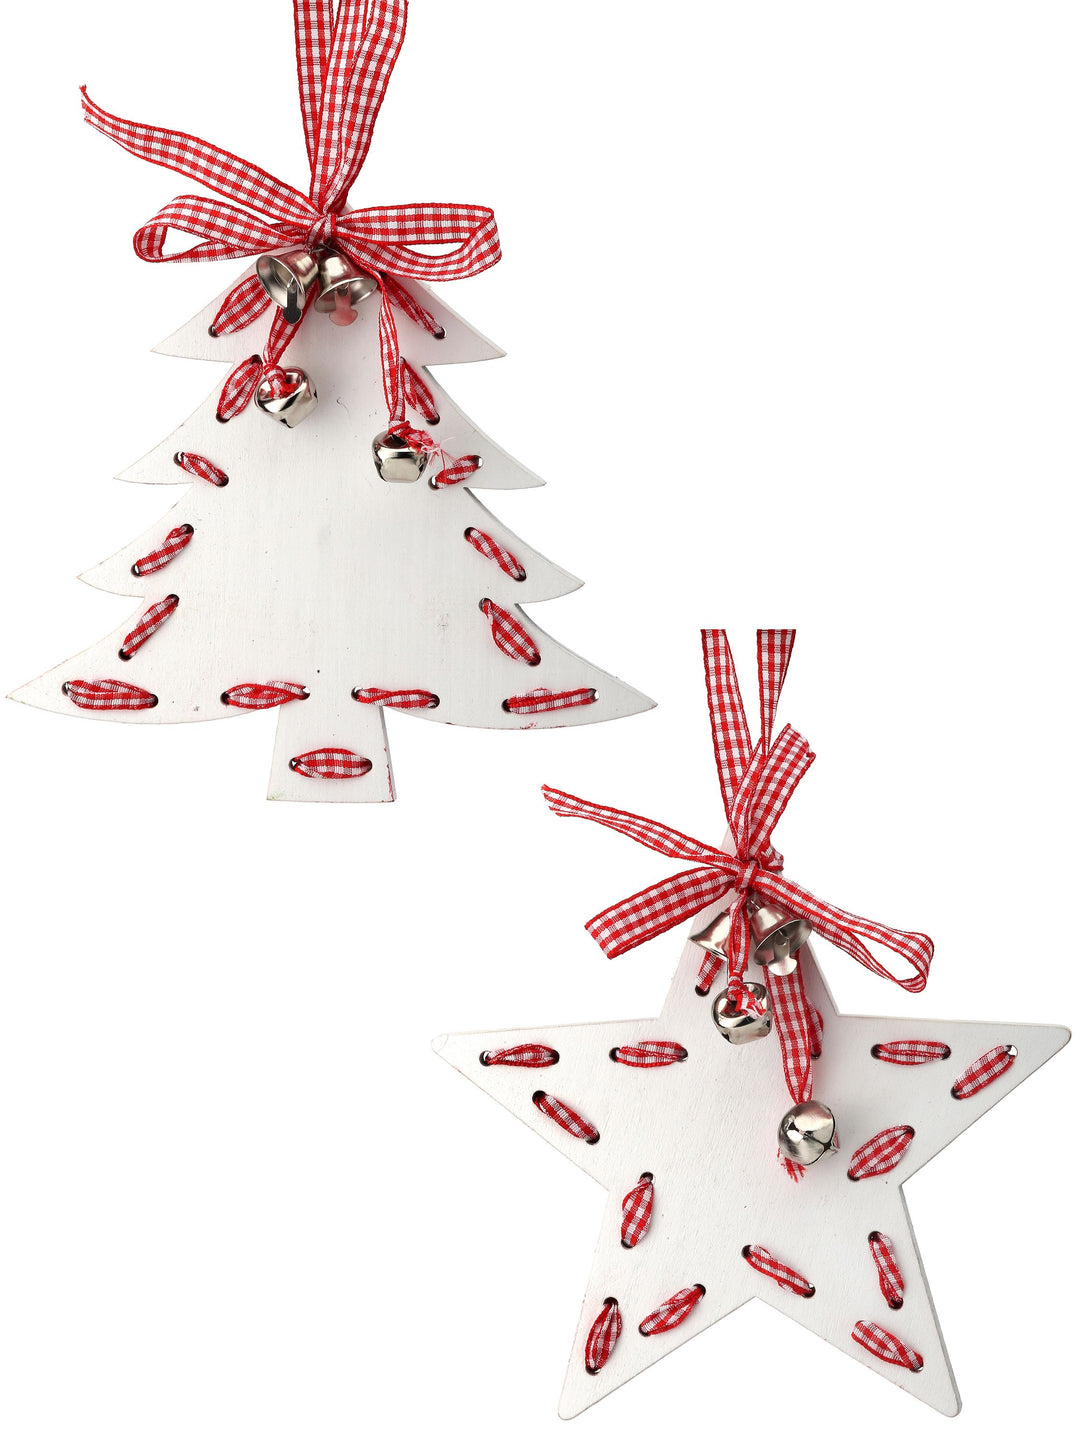 Regency 6" MDF Tree & Star Check Ribbon Ornament set in Red/White with bells